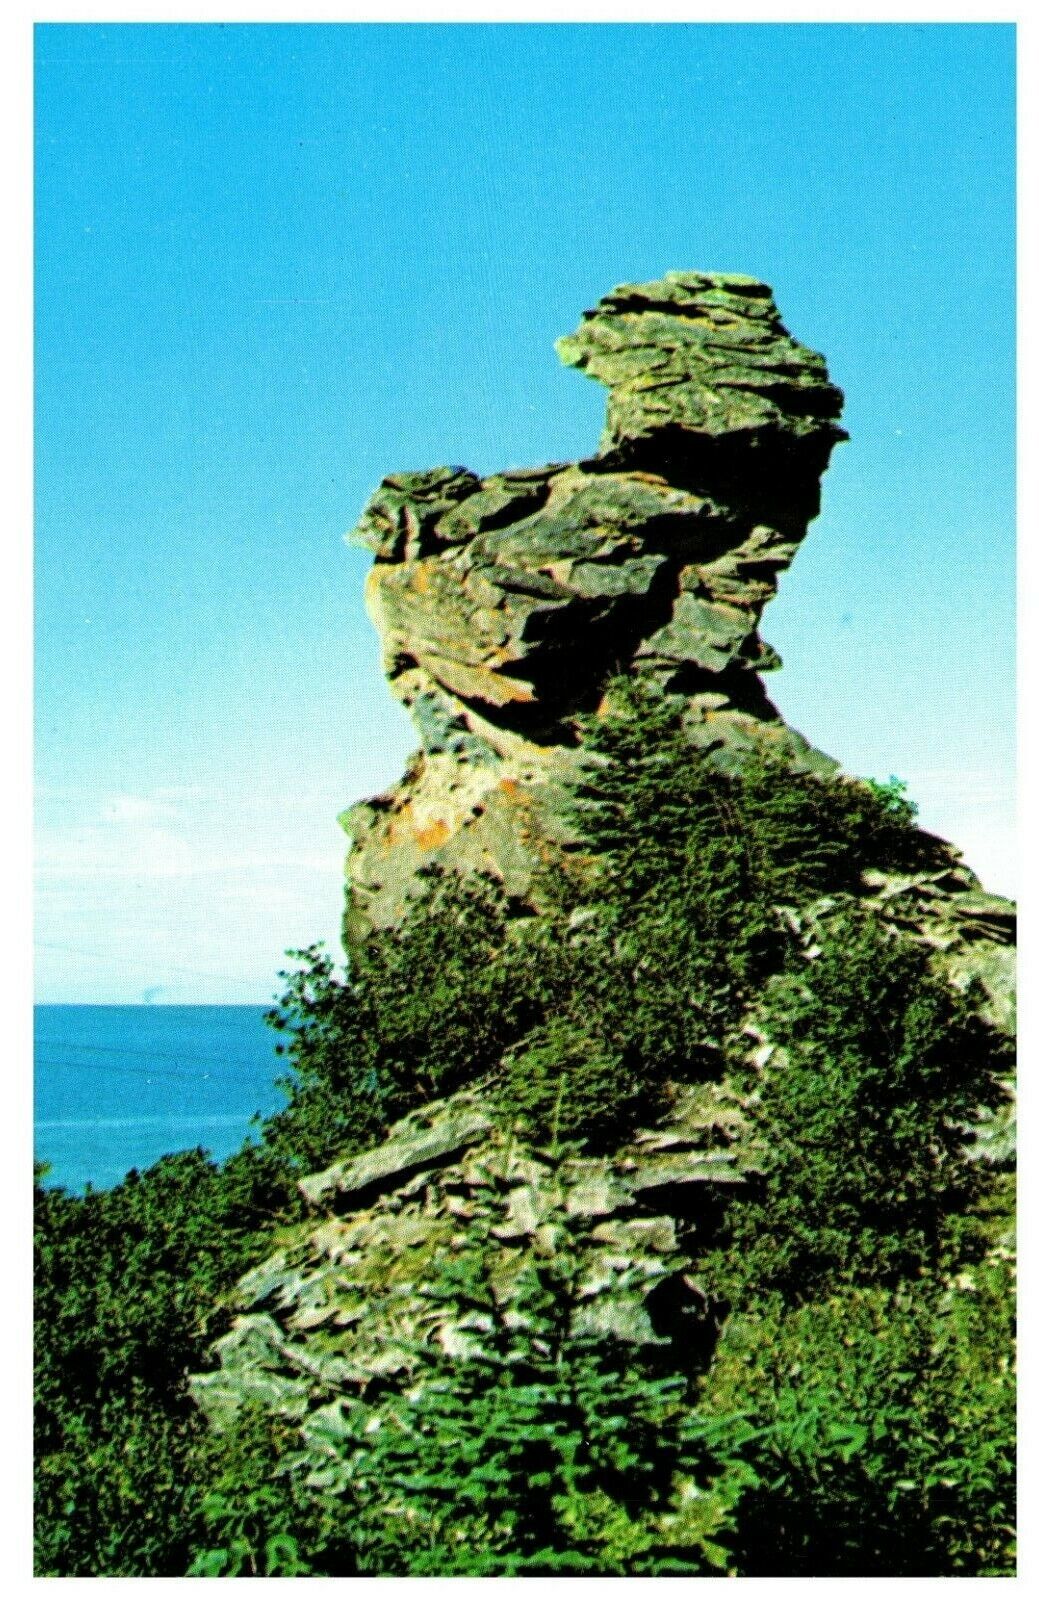 Rock Formation near Lighthouse West end of Village Gaspe Peninsula P. Q.